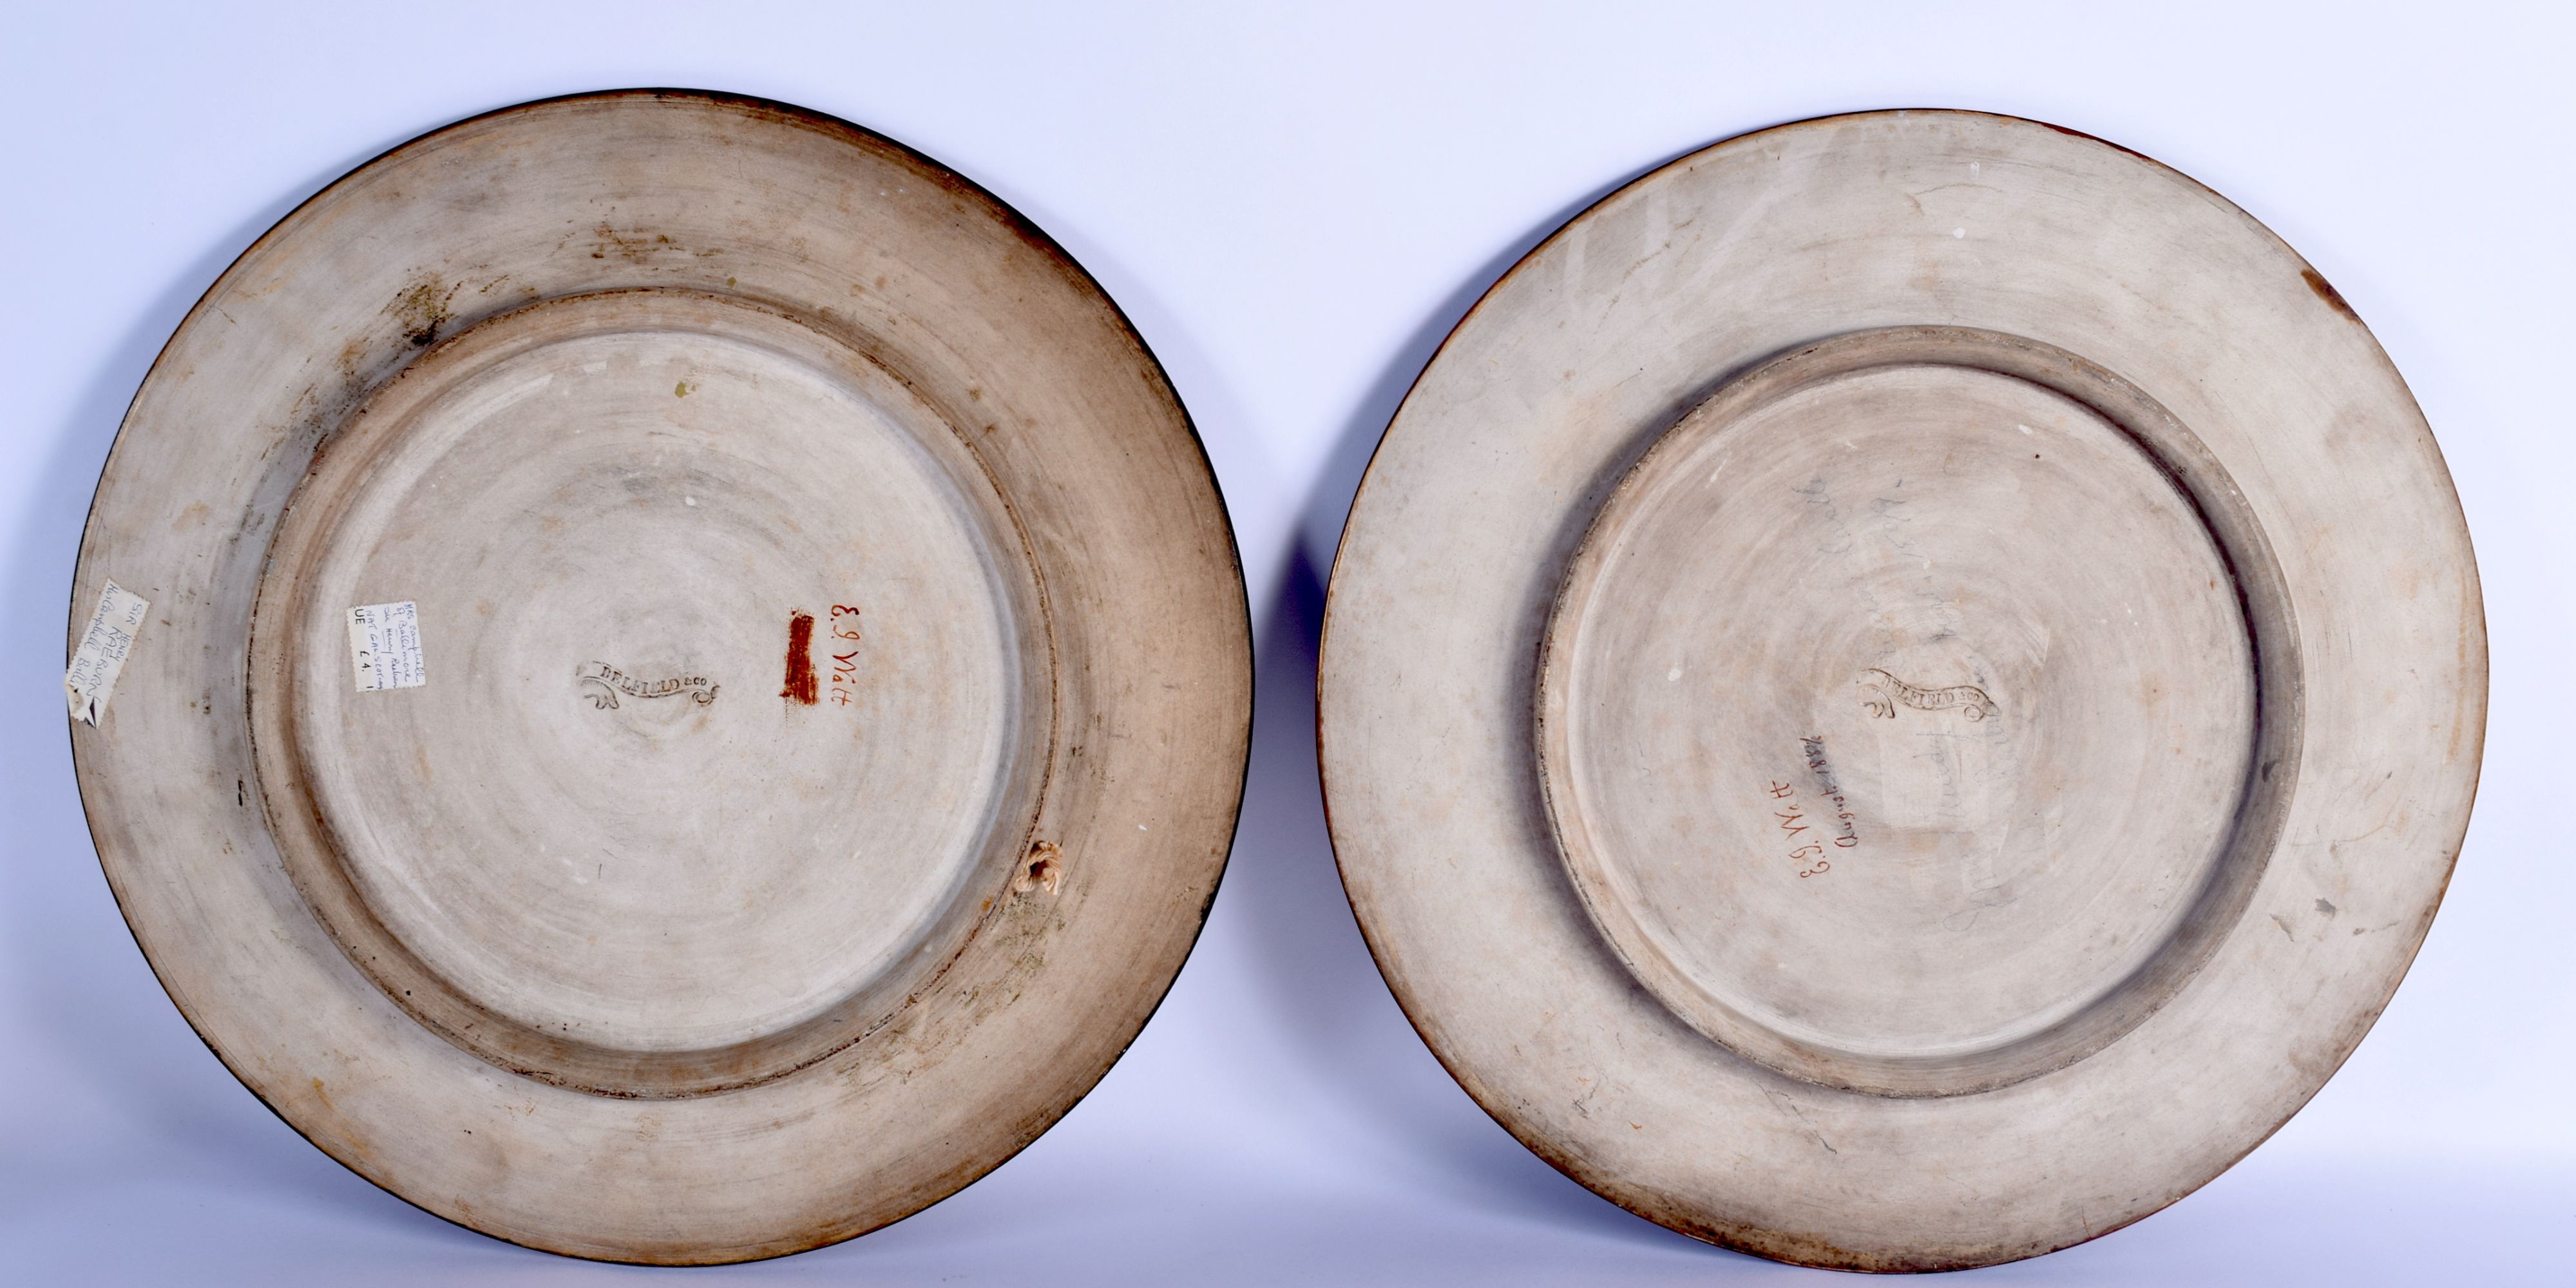 A VERY RARE PAIR OF 19TH CENTURY BELLFIELD & CO TERRACOTTA DISHES painted by E Watt, unusually decor - Image 2 of 5